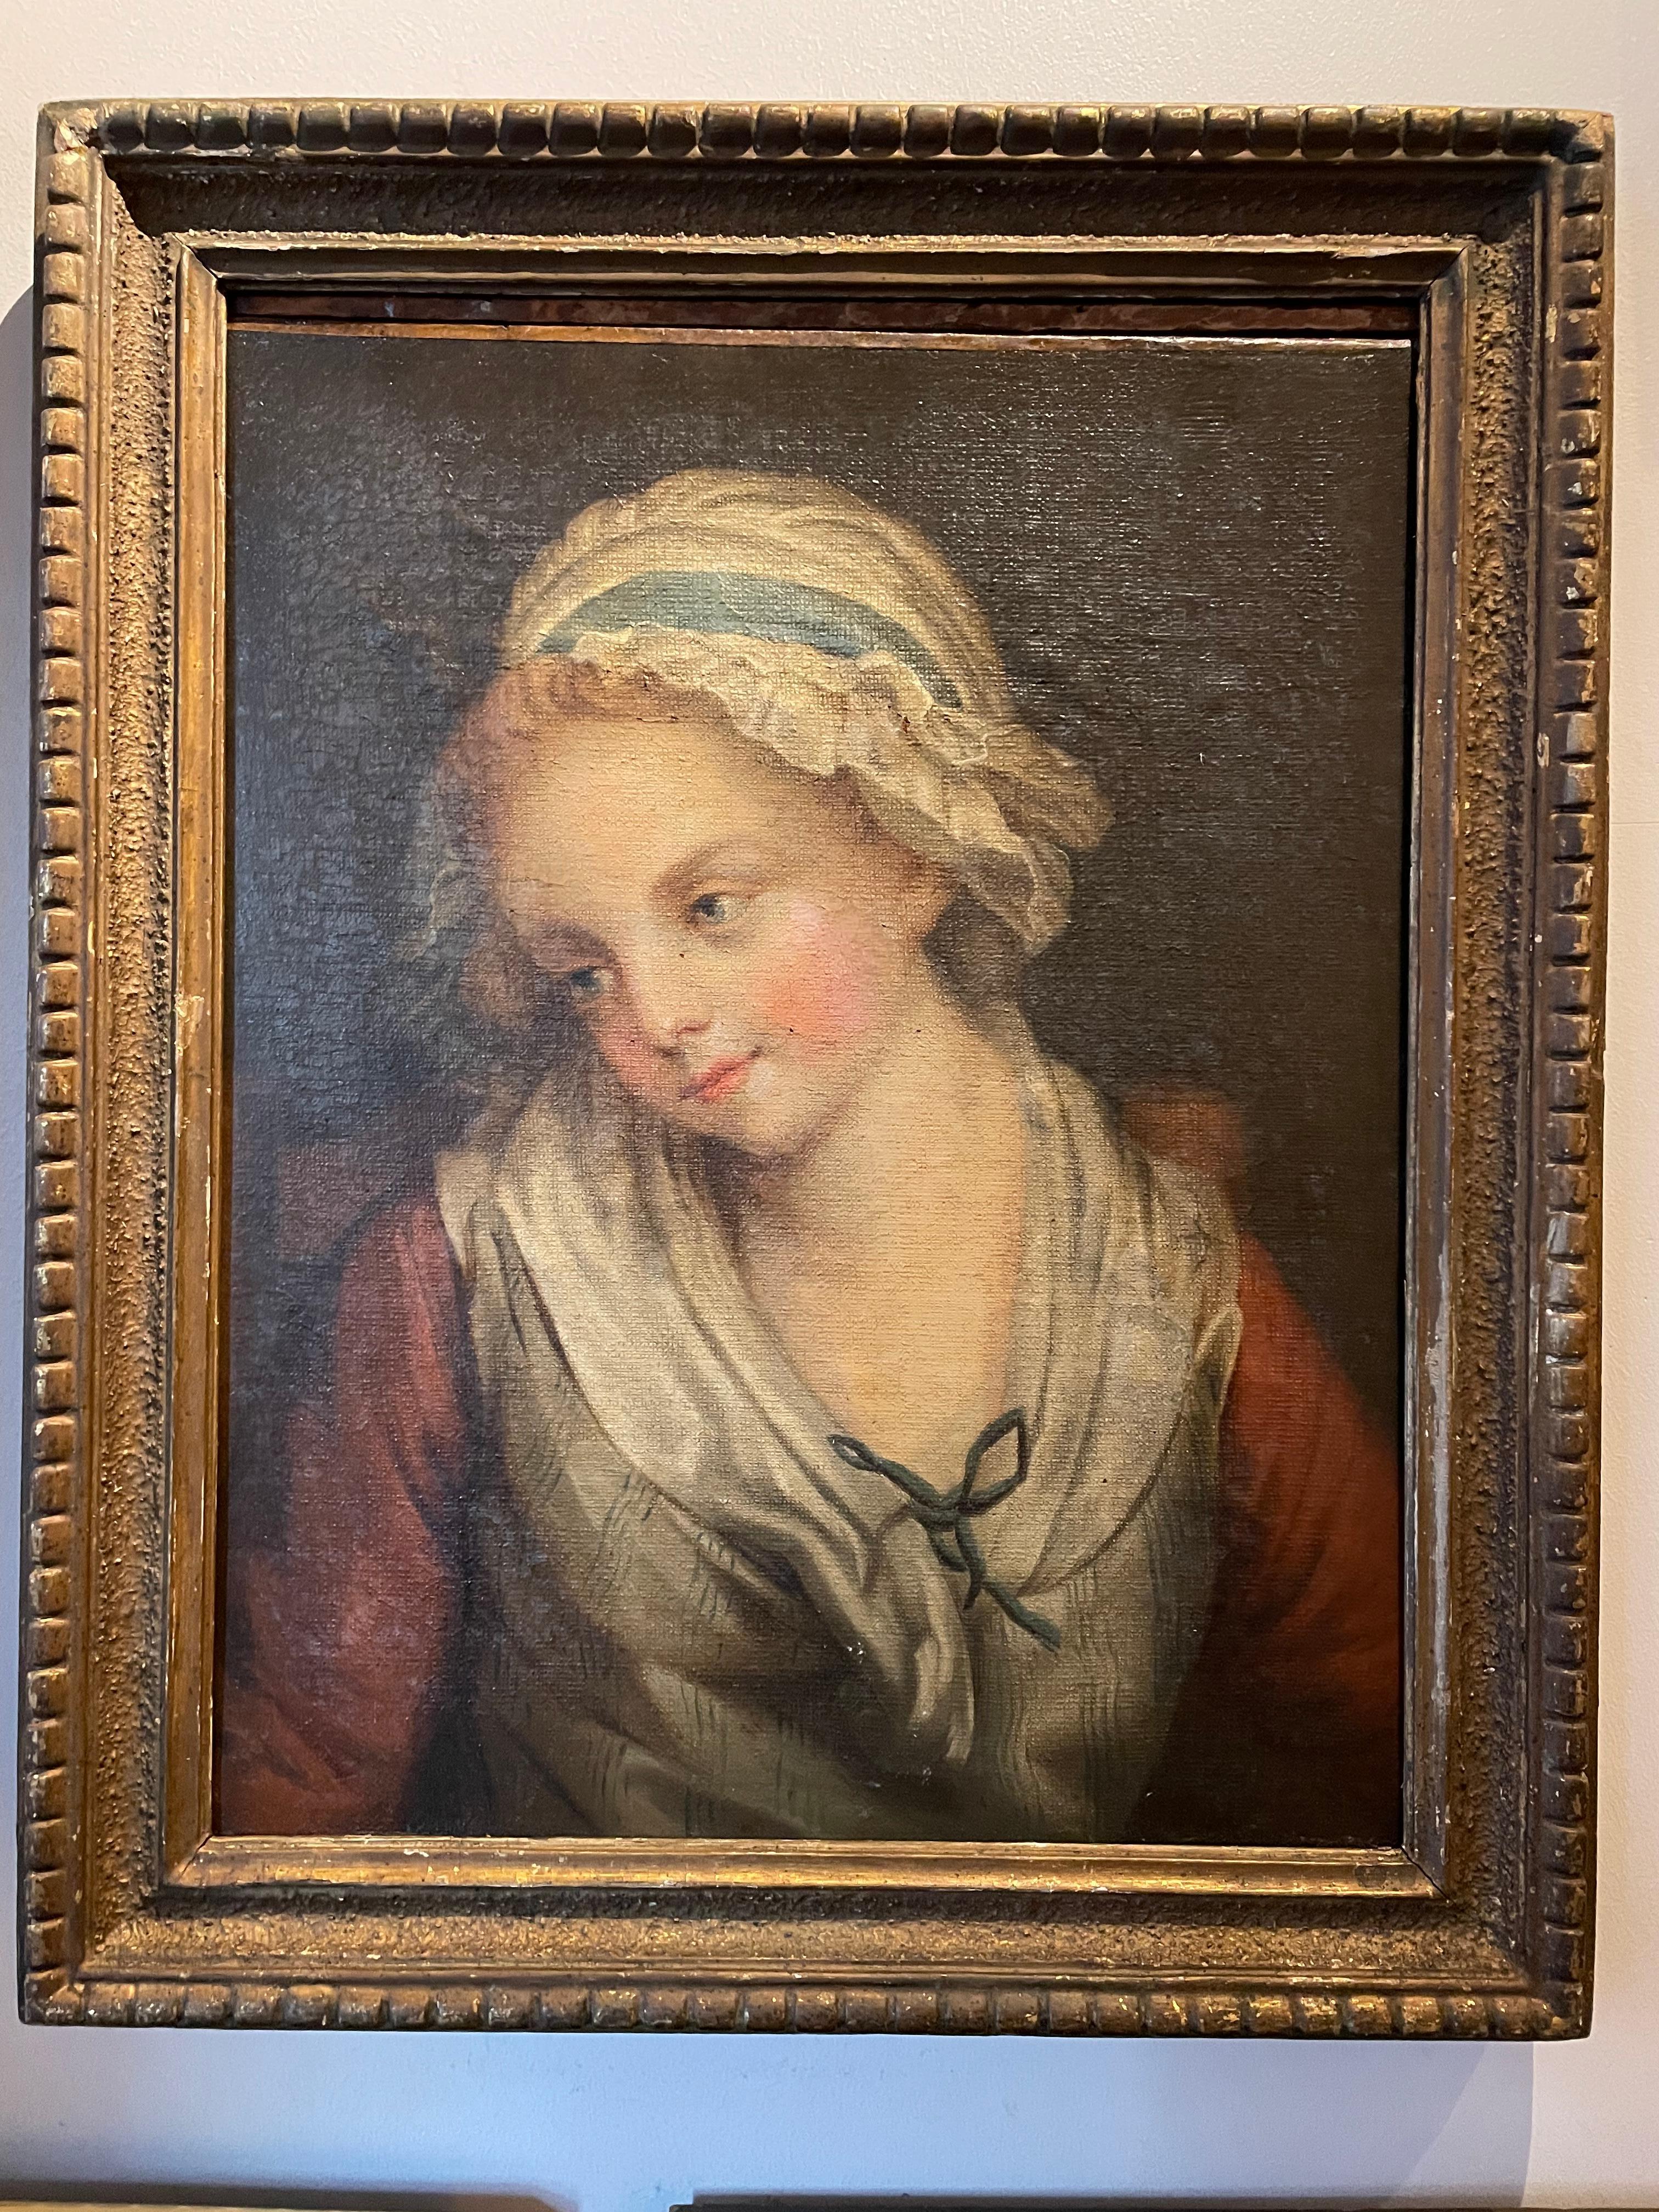 Unknown Portrait Painting - 19th Century French School - Portrait of a Young Maiden, ca 1840